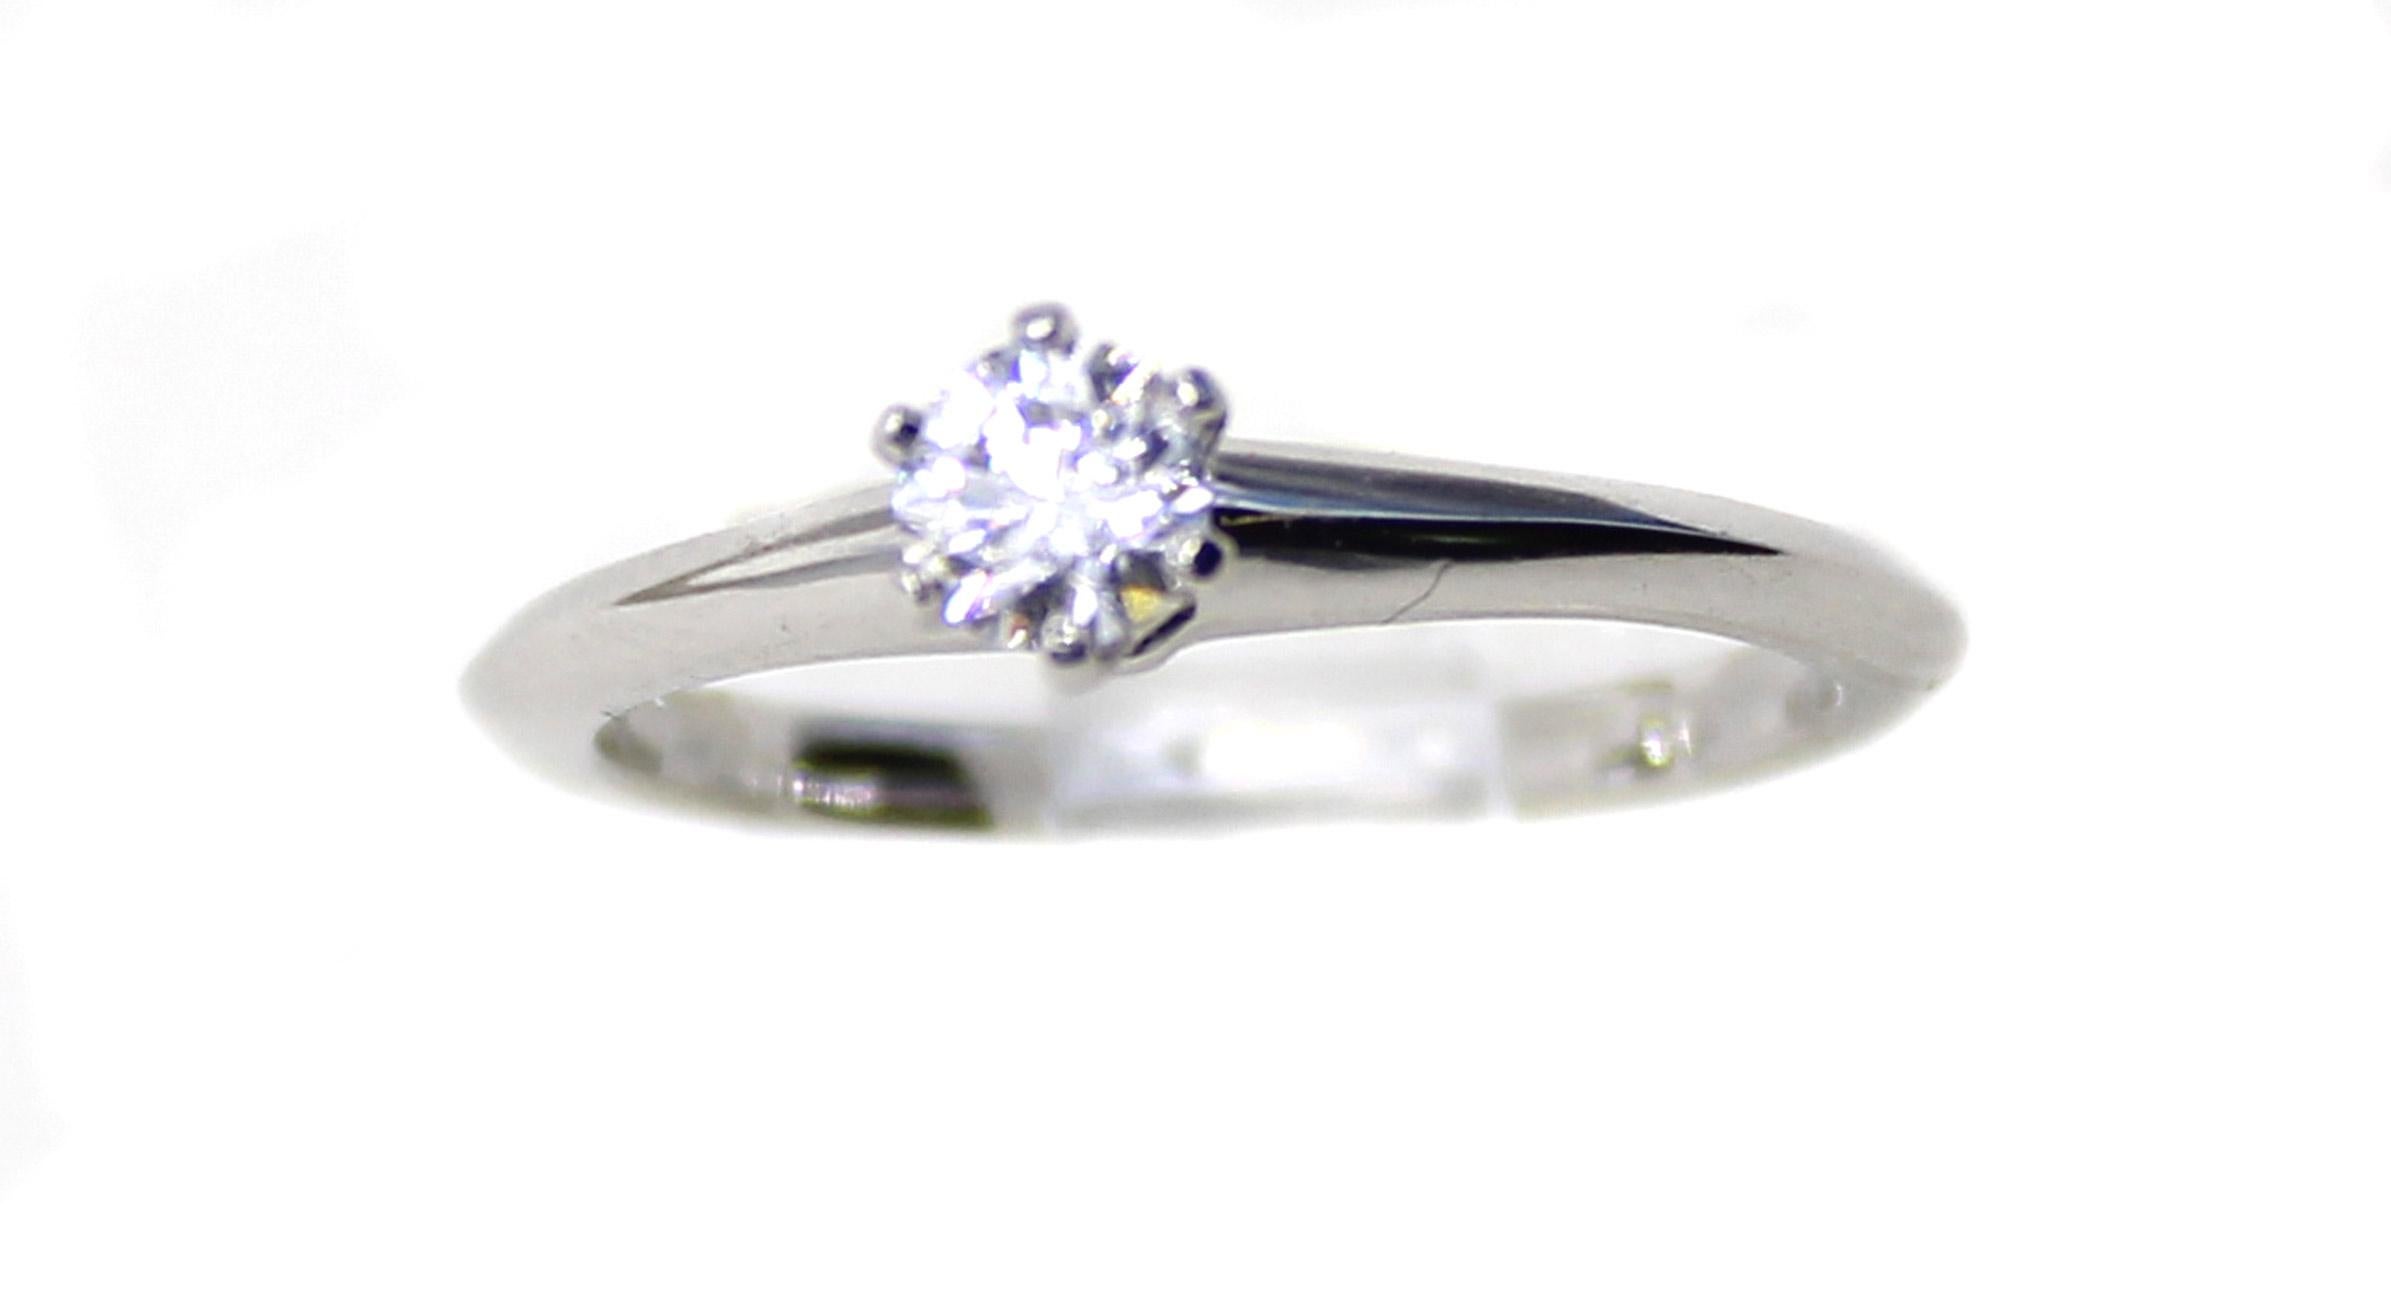 Platinum handcrafted ring by Tiffany & Co. featuring a perfect round brilliant cut diamond secured by 6 prongs. The central diamond is accompanied by a Tiffany certificate stating that the color is E and the clarity  VVS2. Signed on the inside of